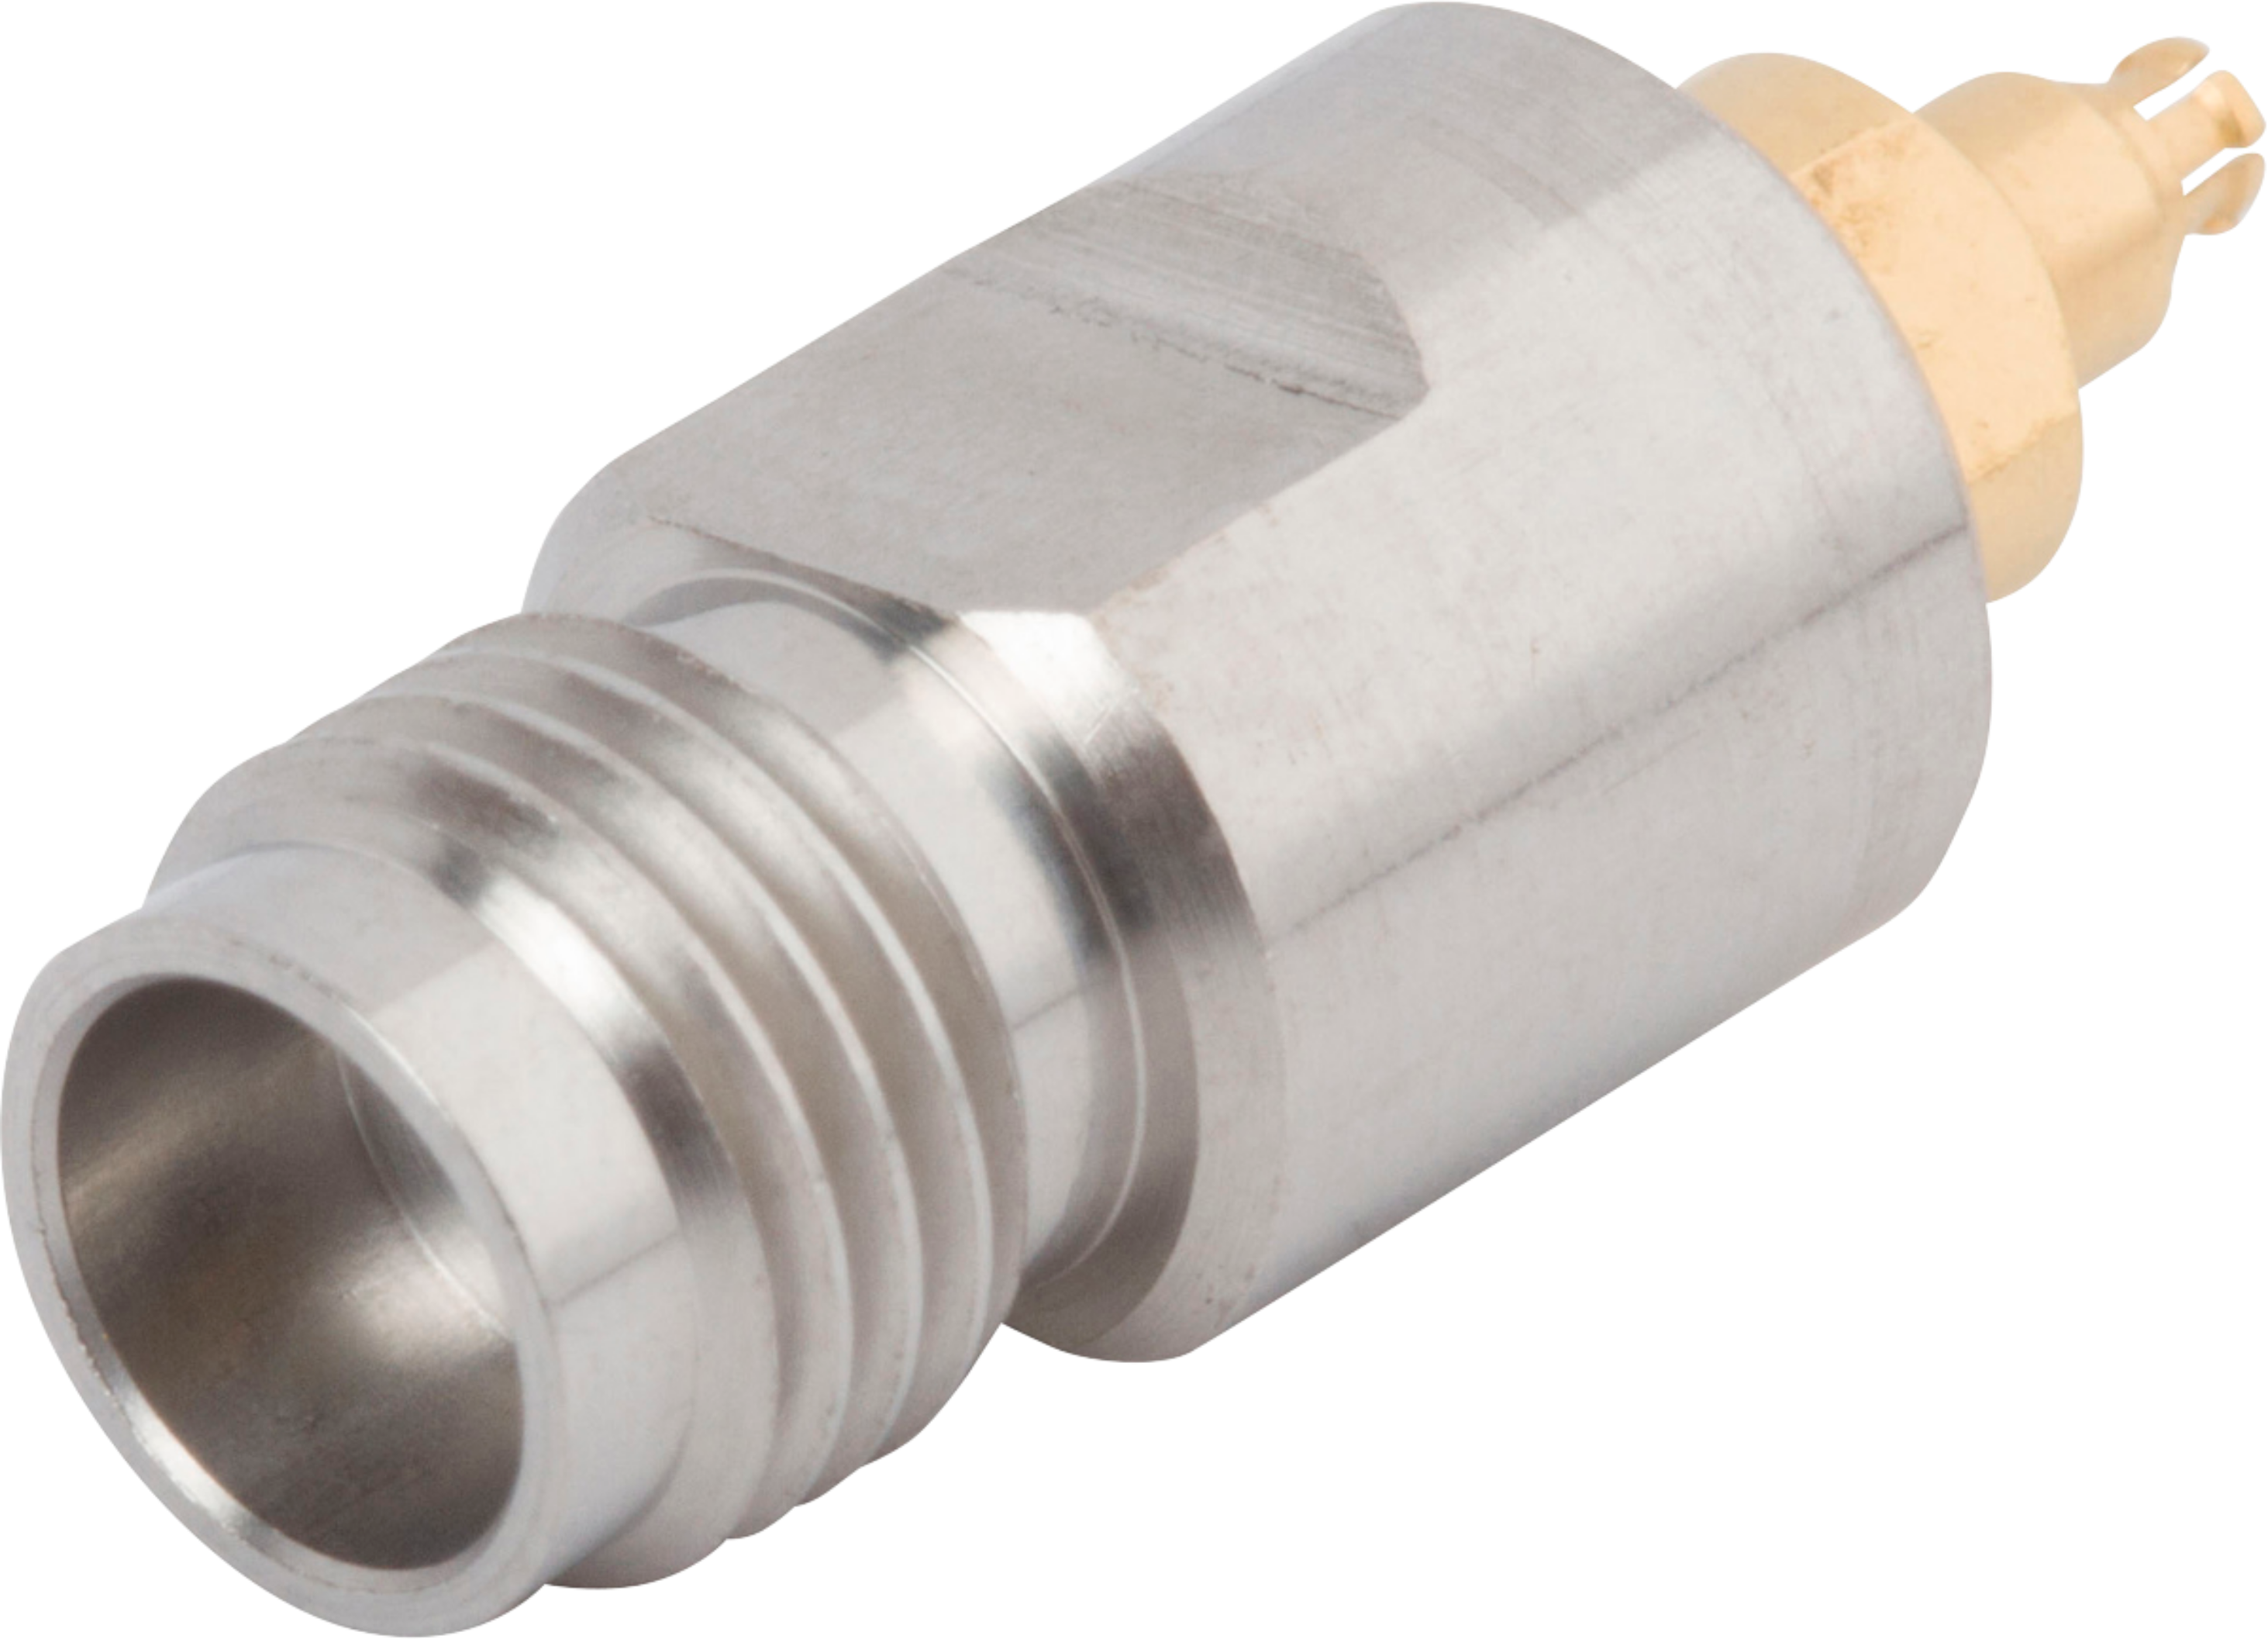 1.85mm Female to SMPS Female Adapter, 1138-6013